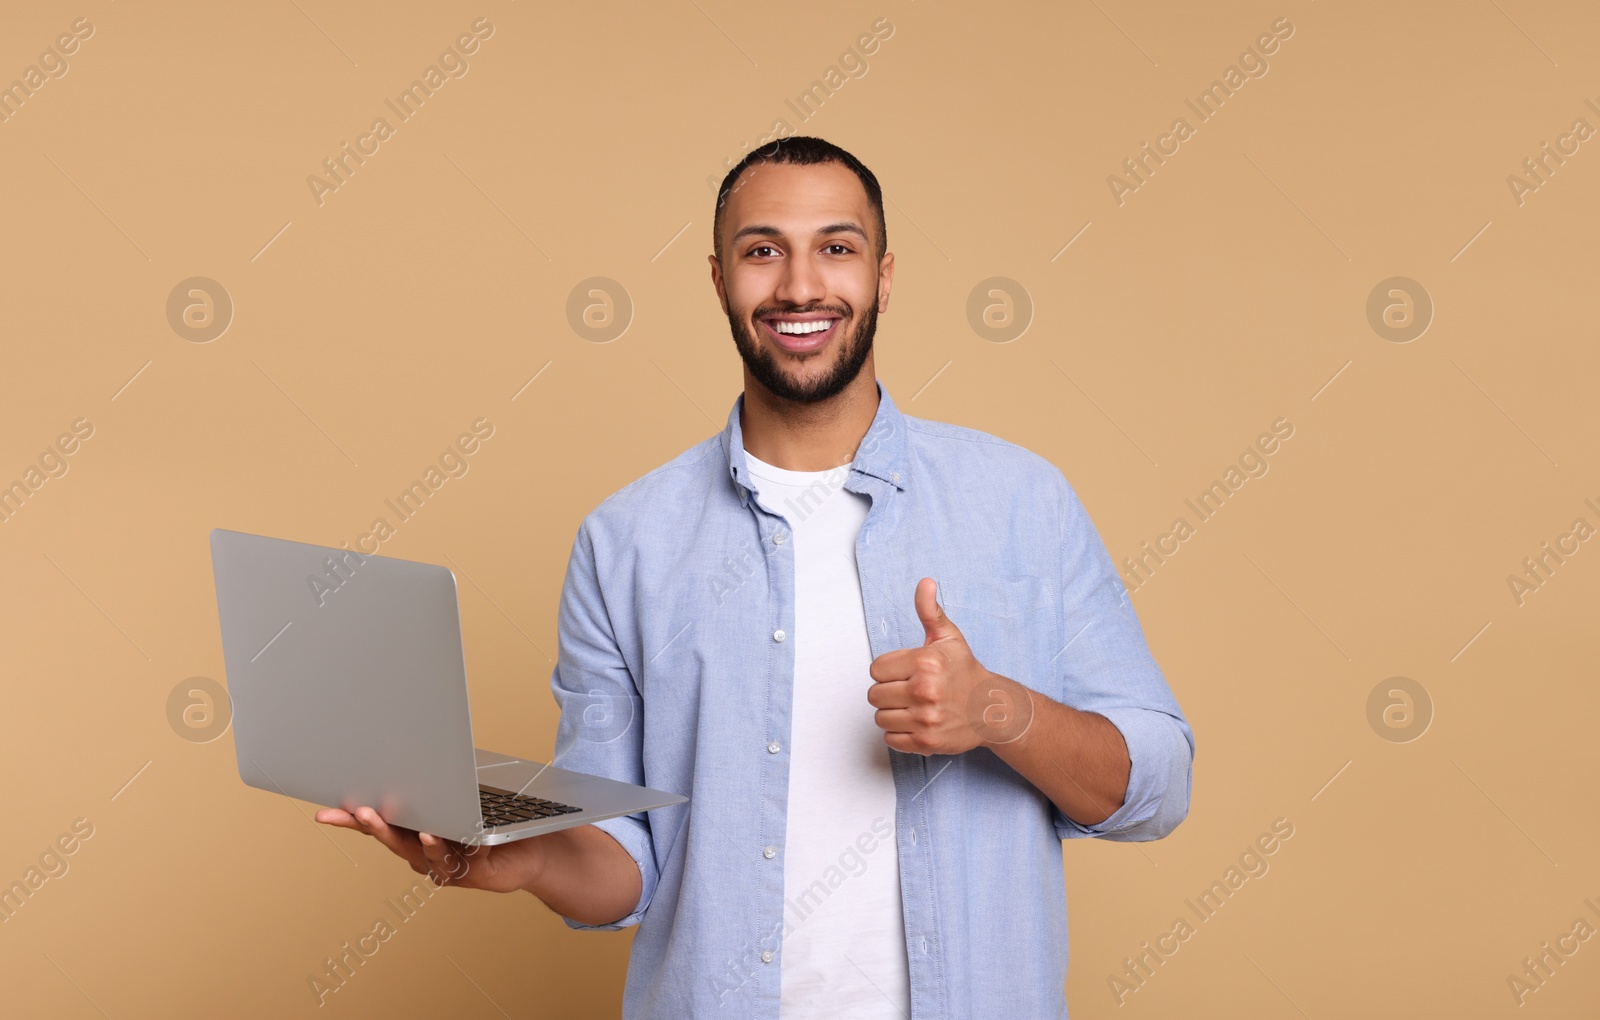 Photo of Smiling young man with laptop showing thumbs up on beige background